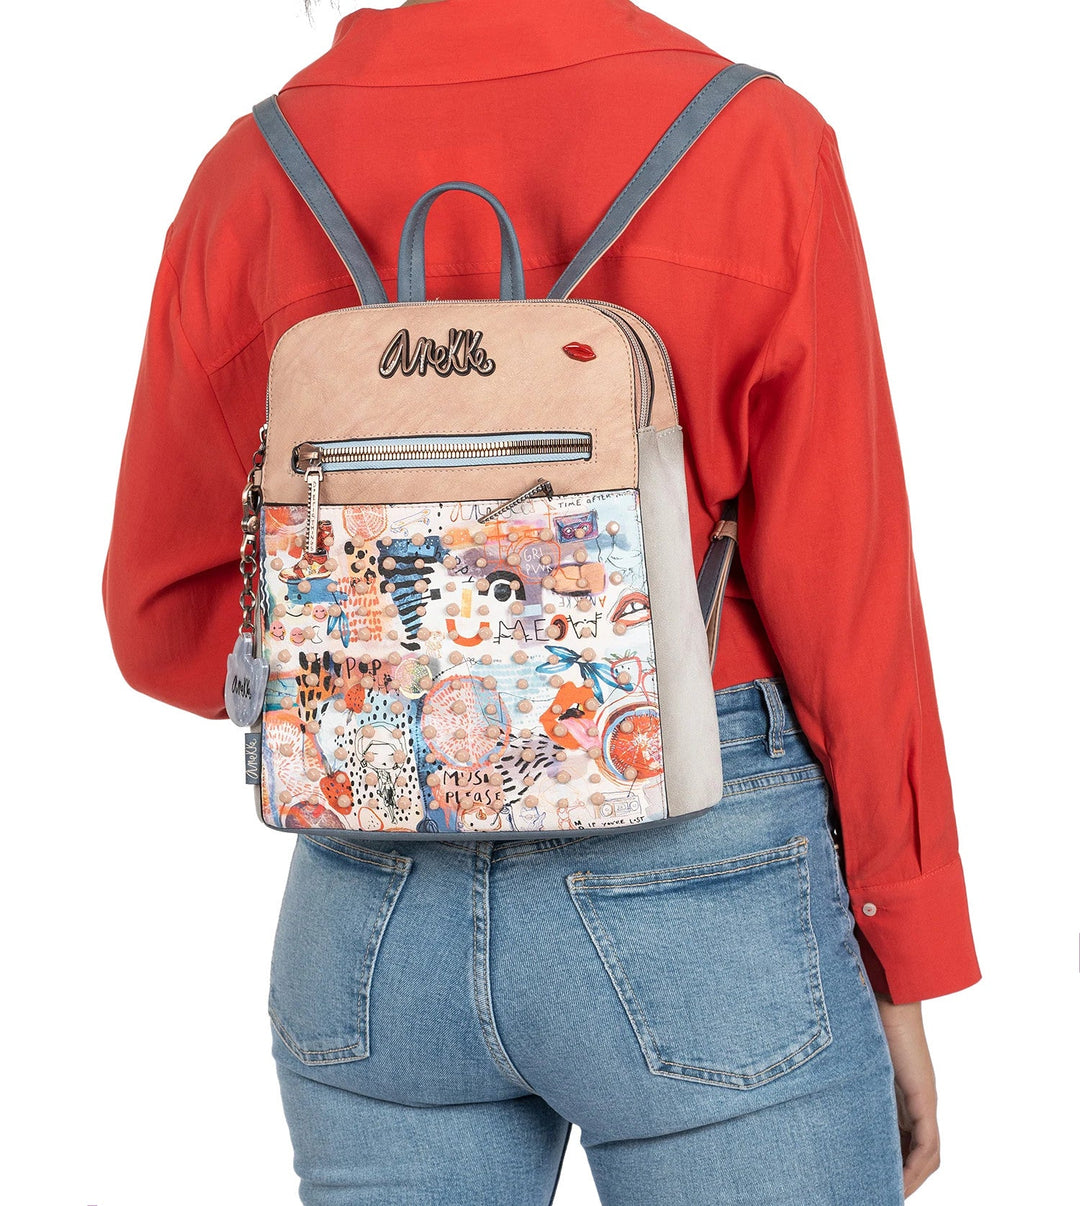 Anekke Fun & Music Double Compartment Backpack